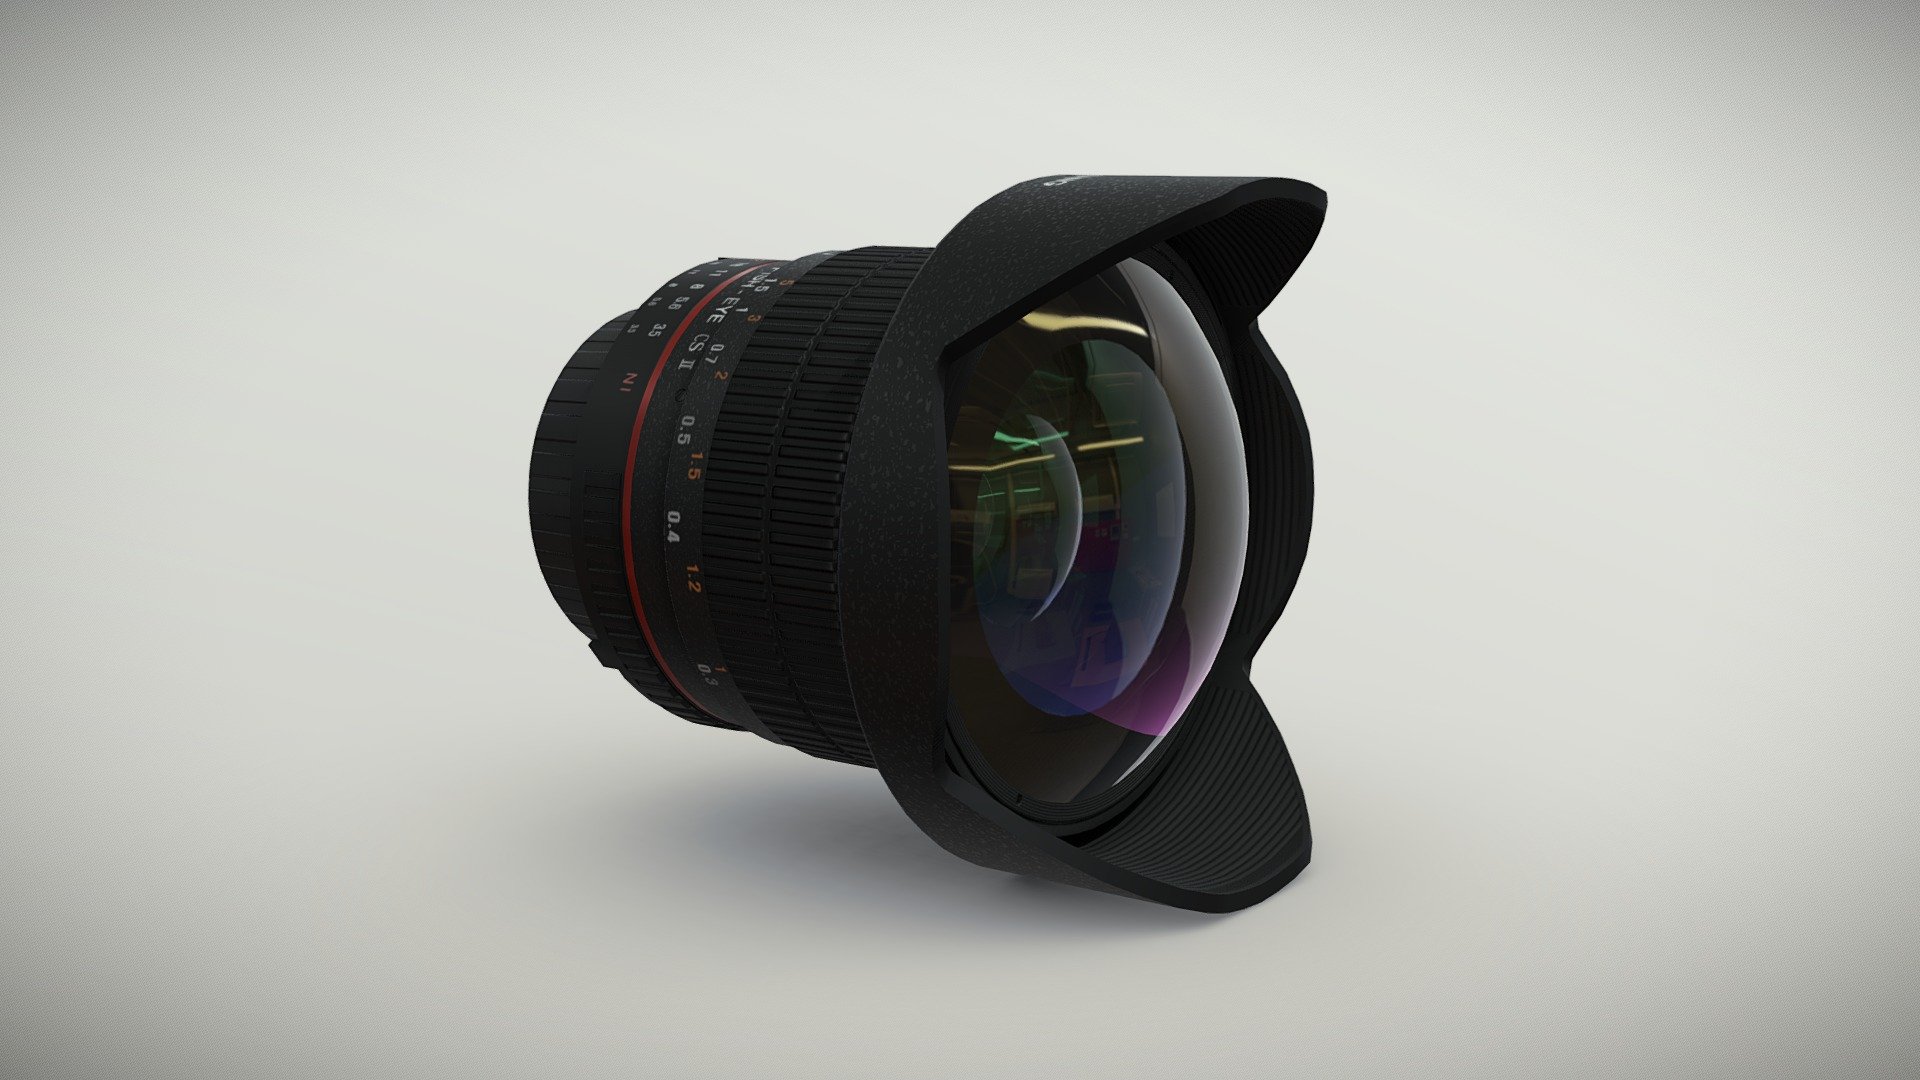 •   Let me present to you high-quality low-poly 3D model Samyang 8mm f/3.5 AS IF UMC Fish-eye CS II AE Nikon F Lens. Modeling was made with ortho-photos of real lens that is why all details of design are recreated most authentically.

•    This model consists of three meshes, it is low-polygonal and it has three materials (for Lens body and Glass of Lens).

•   The total of the main textures is 4. Resolution of all textures is 2048 pixels square aspect ratio in .png format. Also there is original texture file .PSD format in separate archive.

•   Polygon count of the model is – 7493.

•   The model has correct dimensions in real-world scale. All parts grouped and named correctly.

•   To use the model in other 3D programs there are scenes saved in formats .fbx, .obj, .DAE, .max (2010 version).

Note: If you see some artifacts on the textures, it means compression works in the Viewer. We recommend setting HD quality for textures. But anyway, original textures have no artifacts 3d model